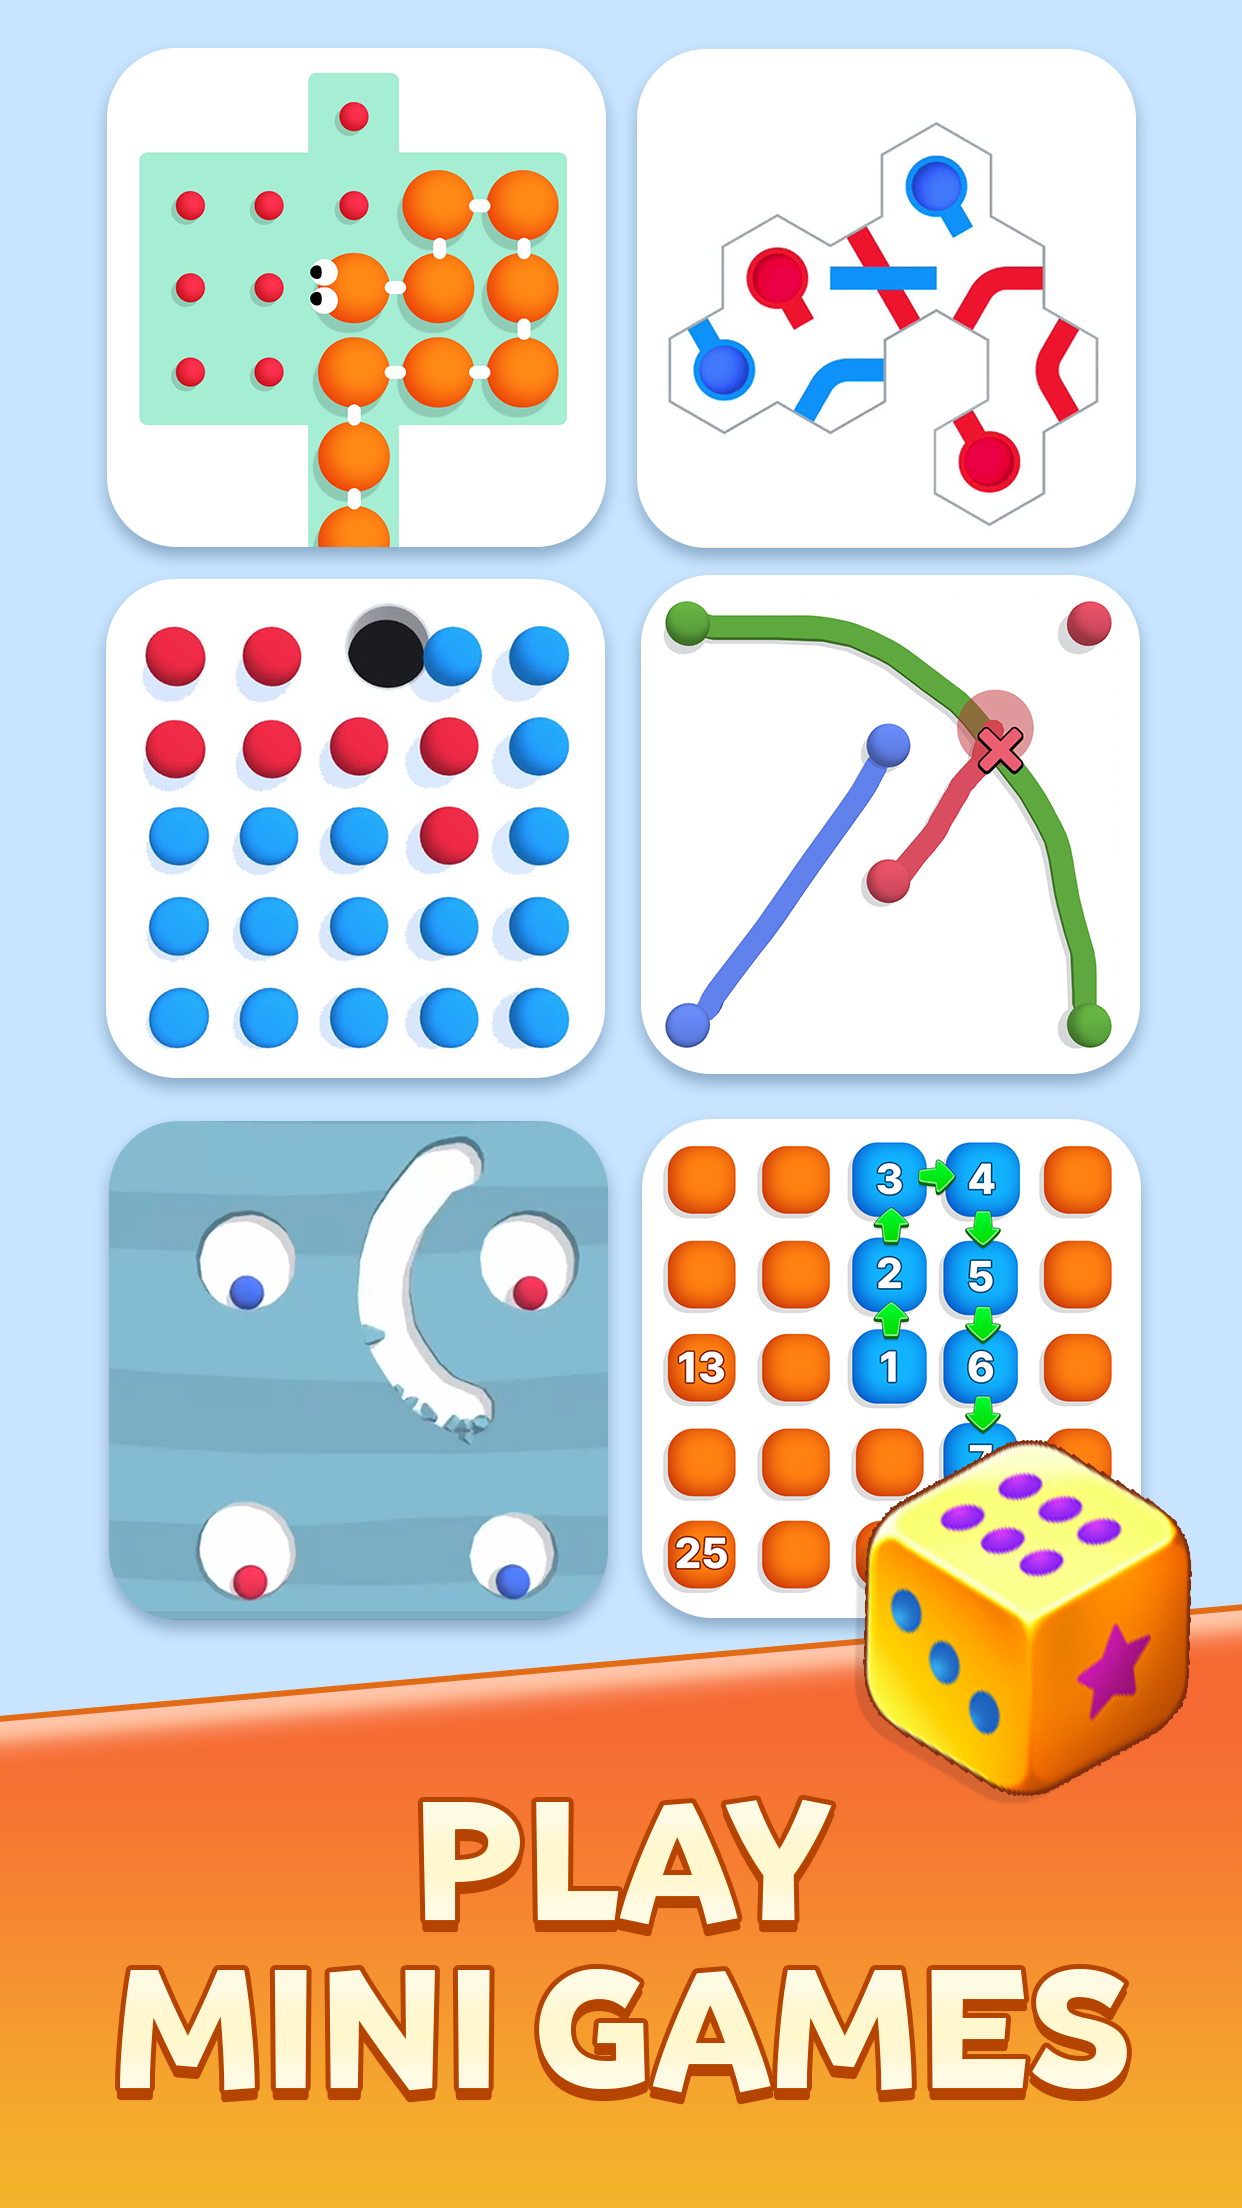 Collect Em All! Clear the Dots screenshot game